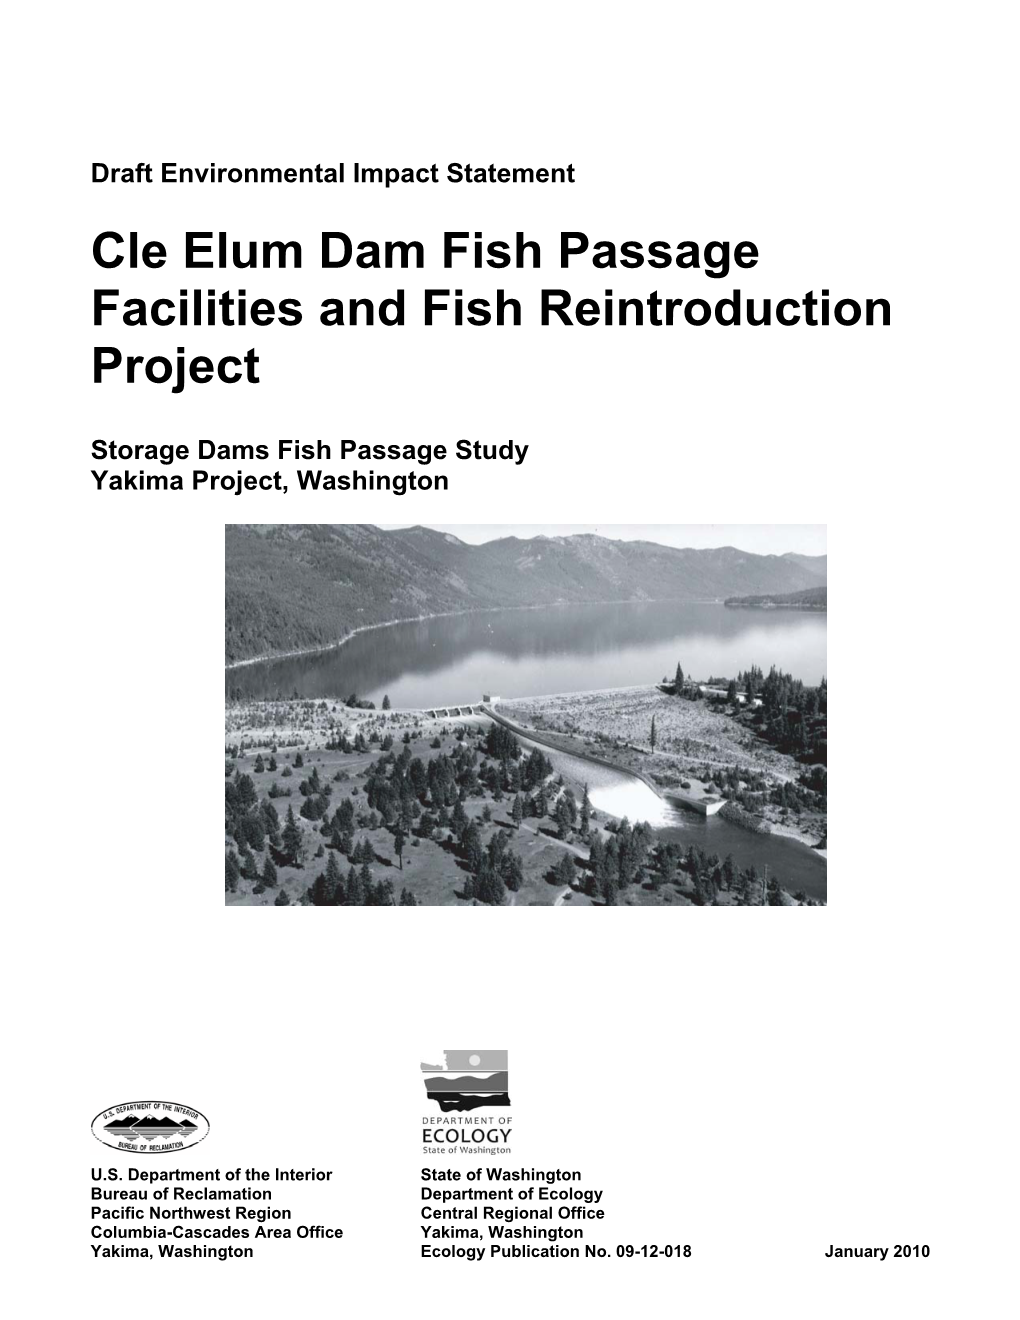 Cle Elum Dam Fish Passage Facilities and Fish Reintroduction Project